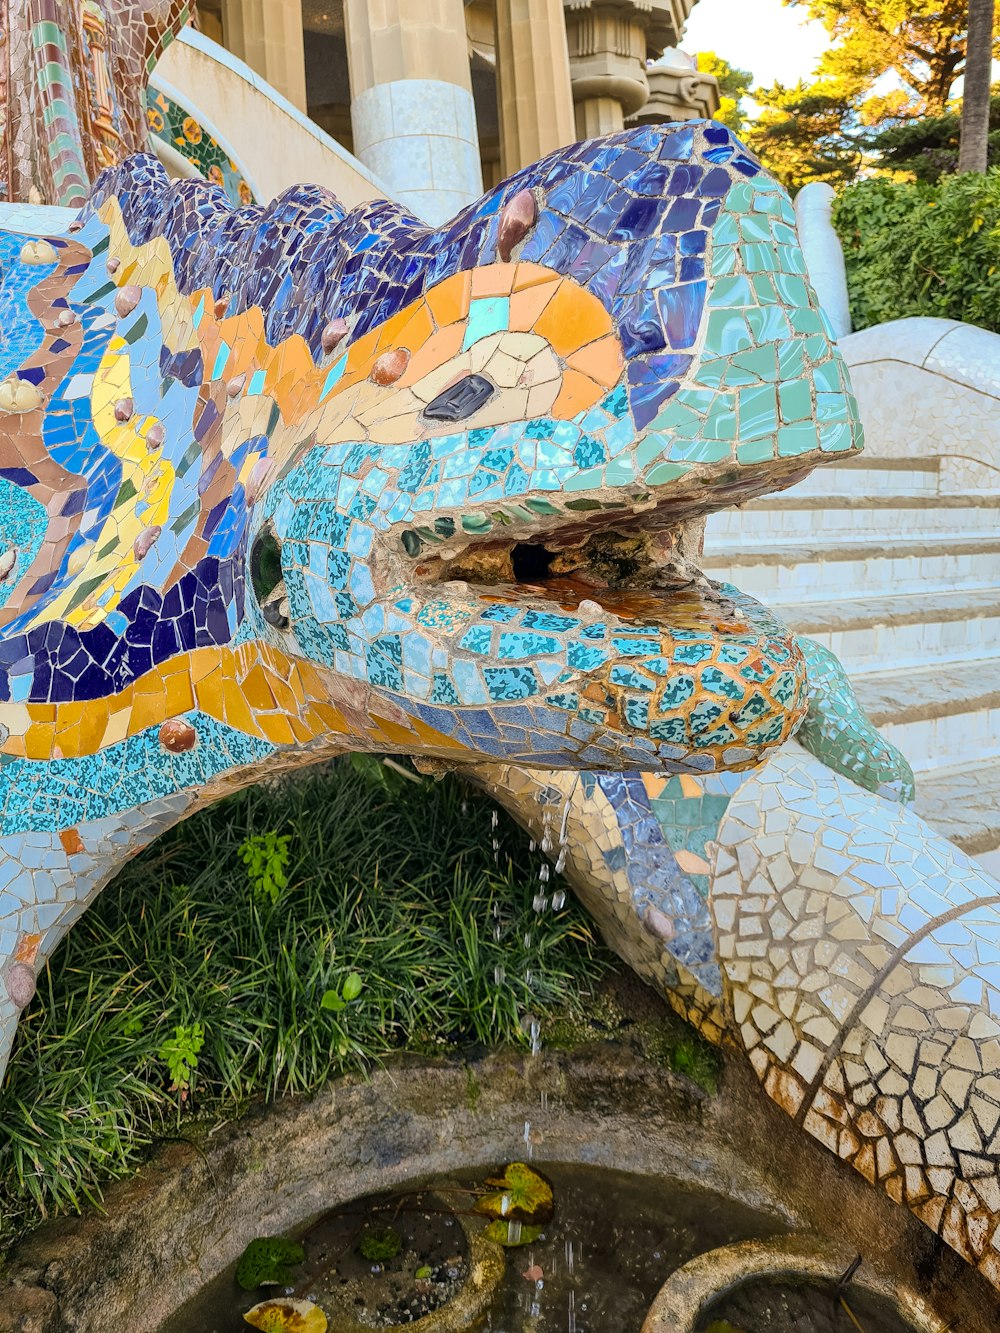 a statue of an elephant made out of mosaic tiles